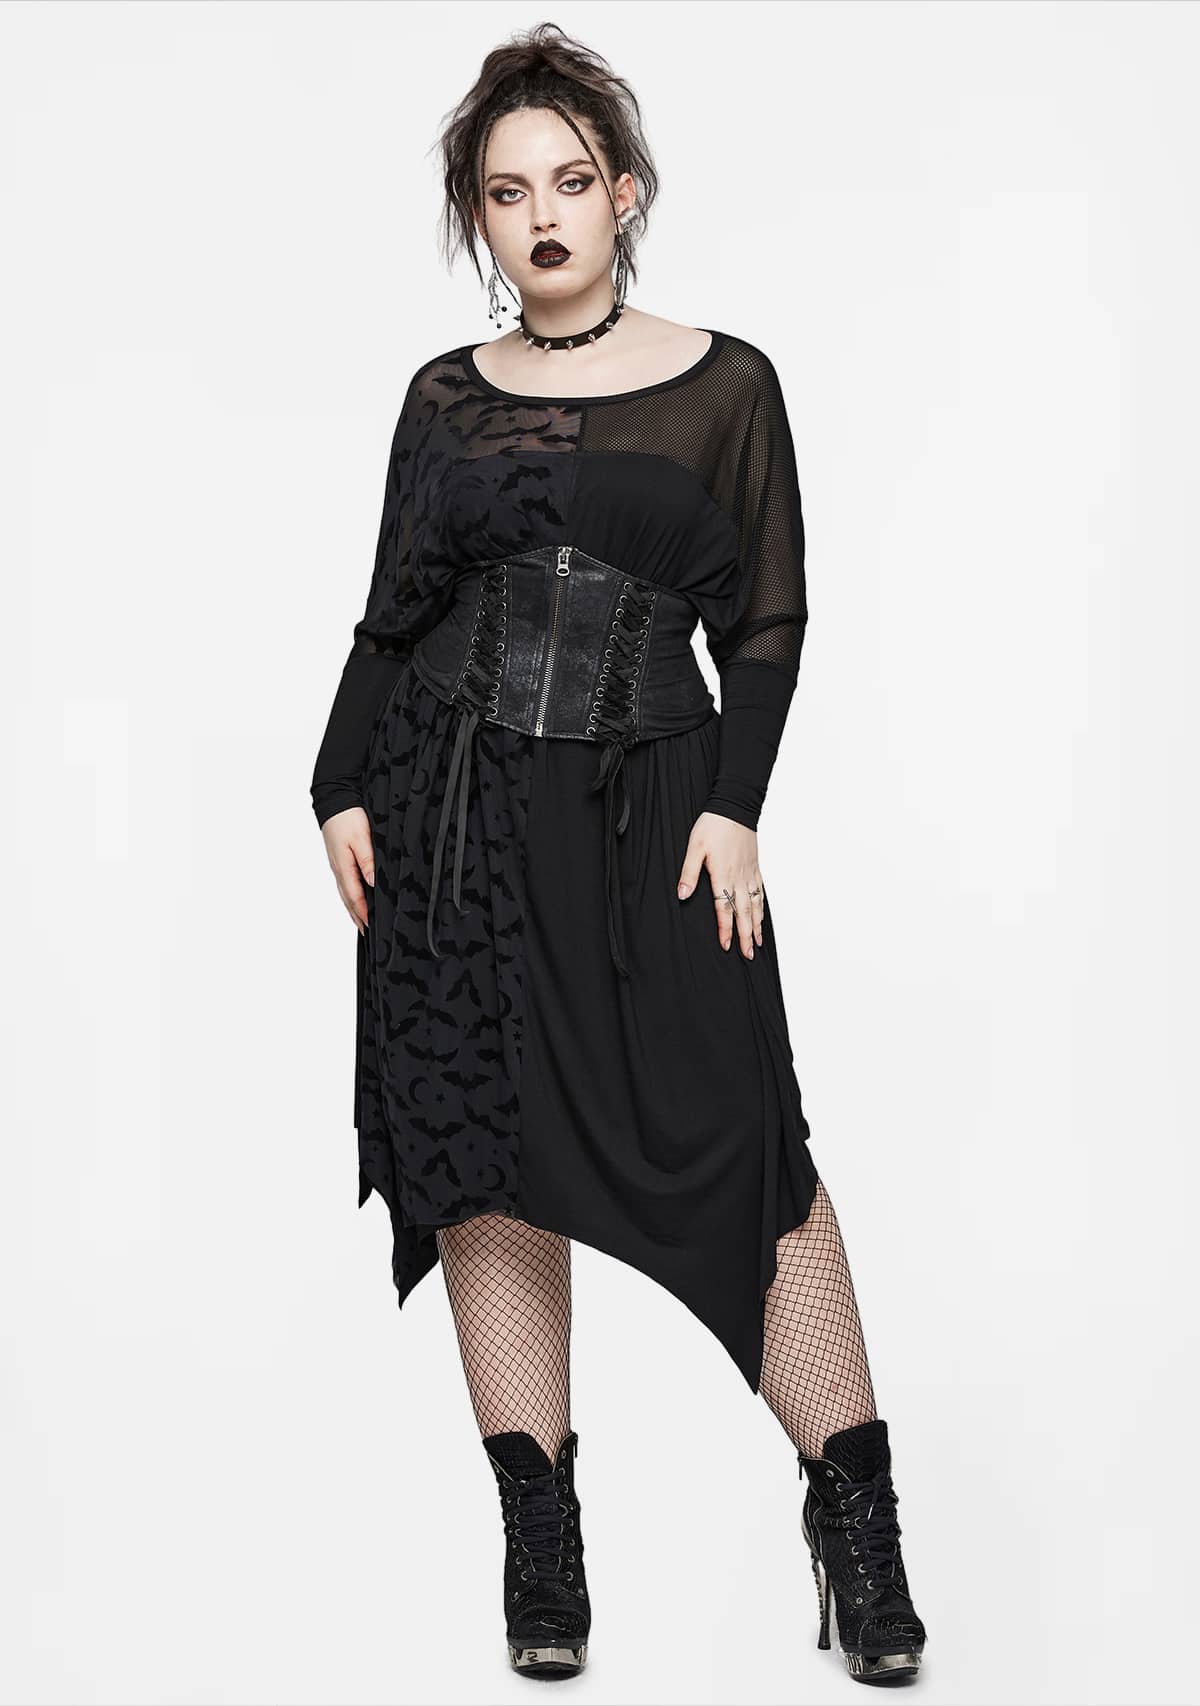 Spin Doctor Plus Size Gothic Black Steampunk Lorena Top [SD6393